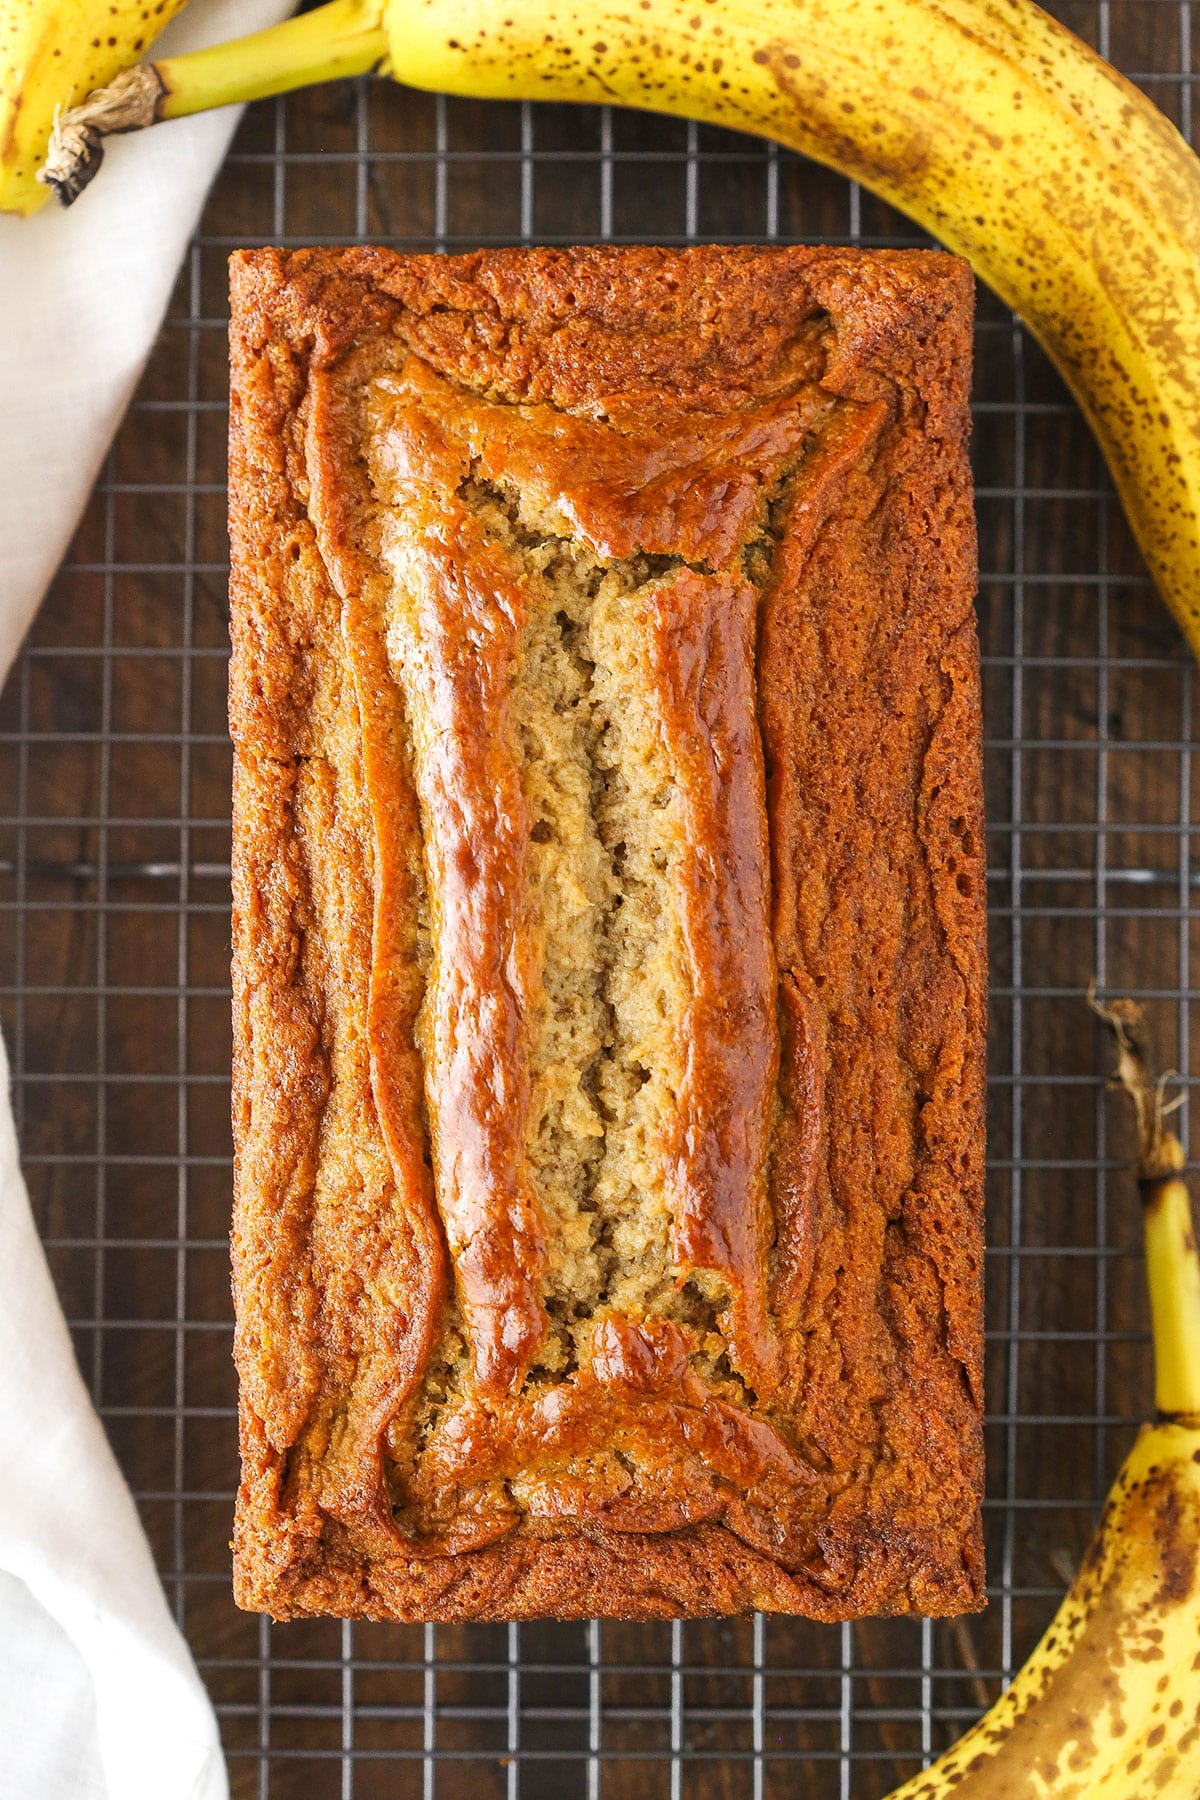 Overhead view of a full loaf of Banana Bread on a cooling rack